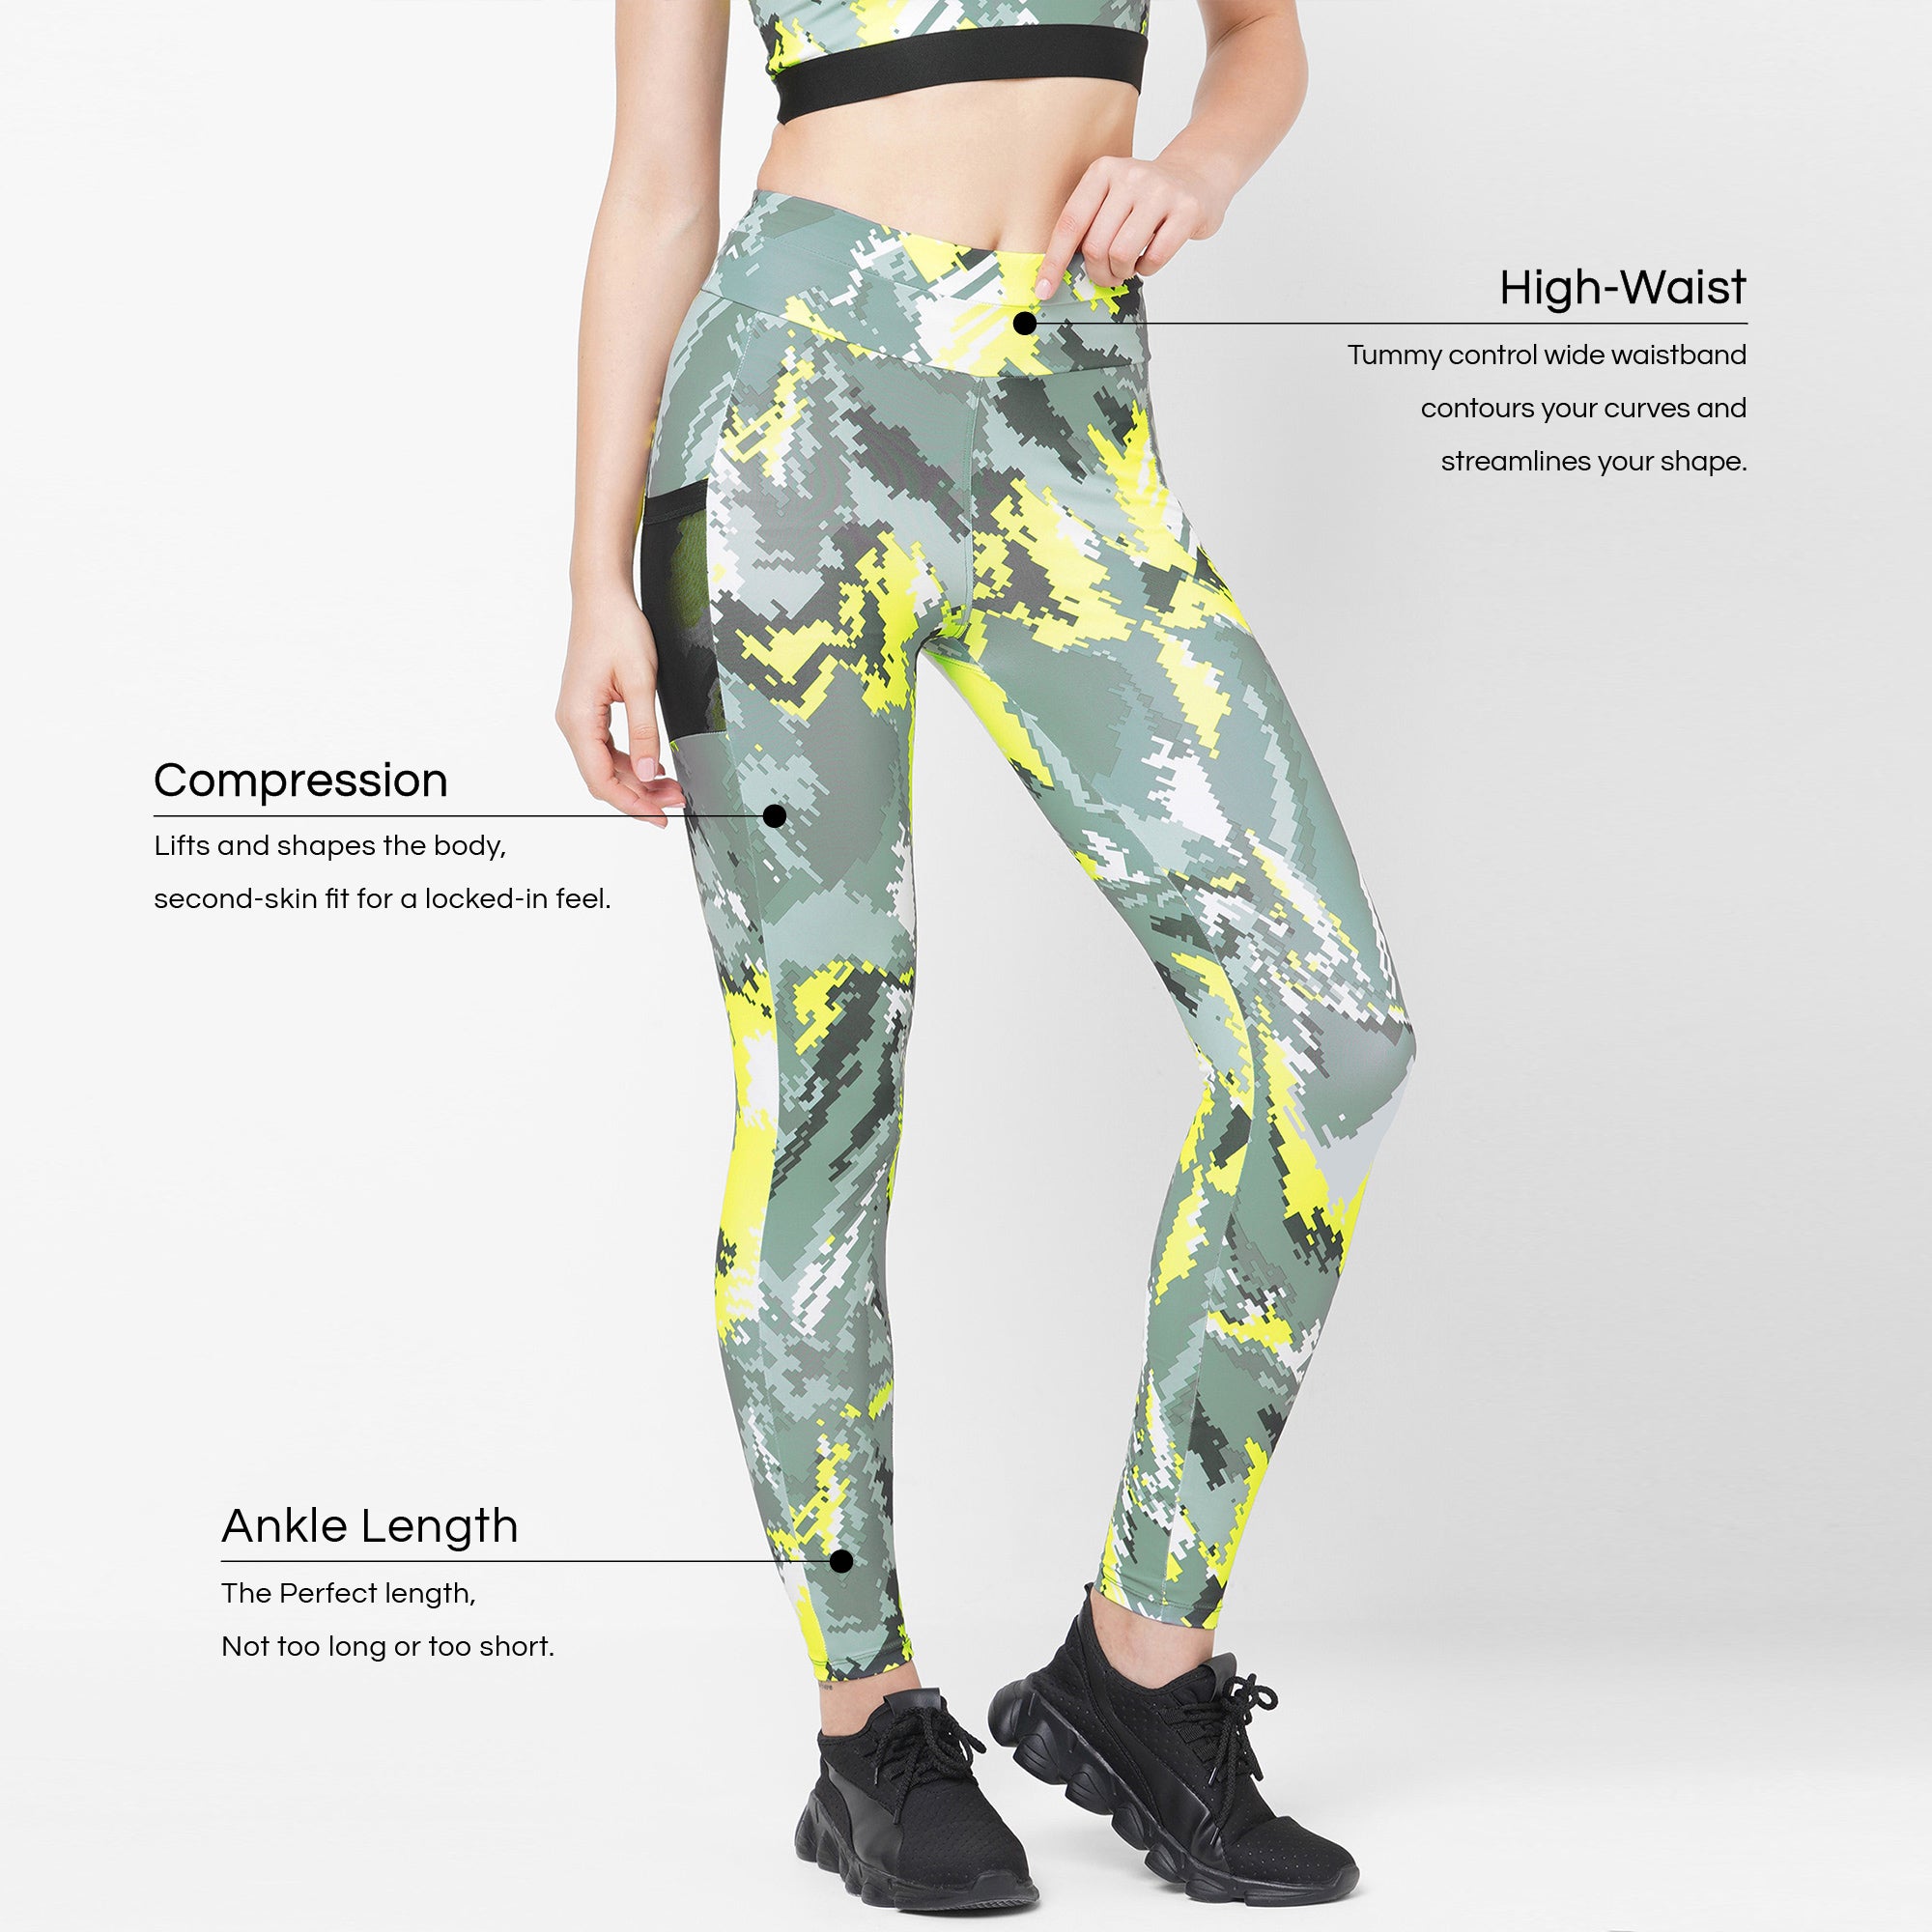 Women's Active Camouflage Workout Leggings. • High rise waistband features  a pocket for keys, cash, or phone • Faded camouflage print • 4-way stretch  for a move with you feel • Moisture